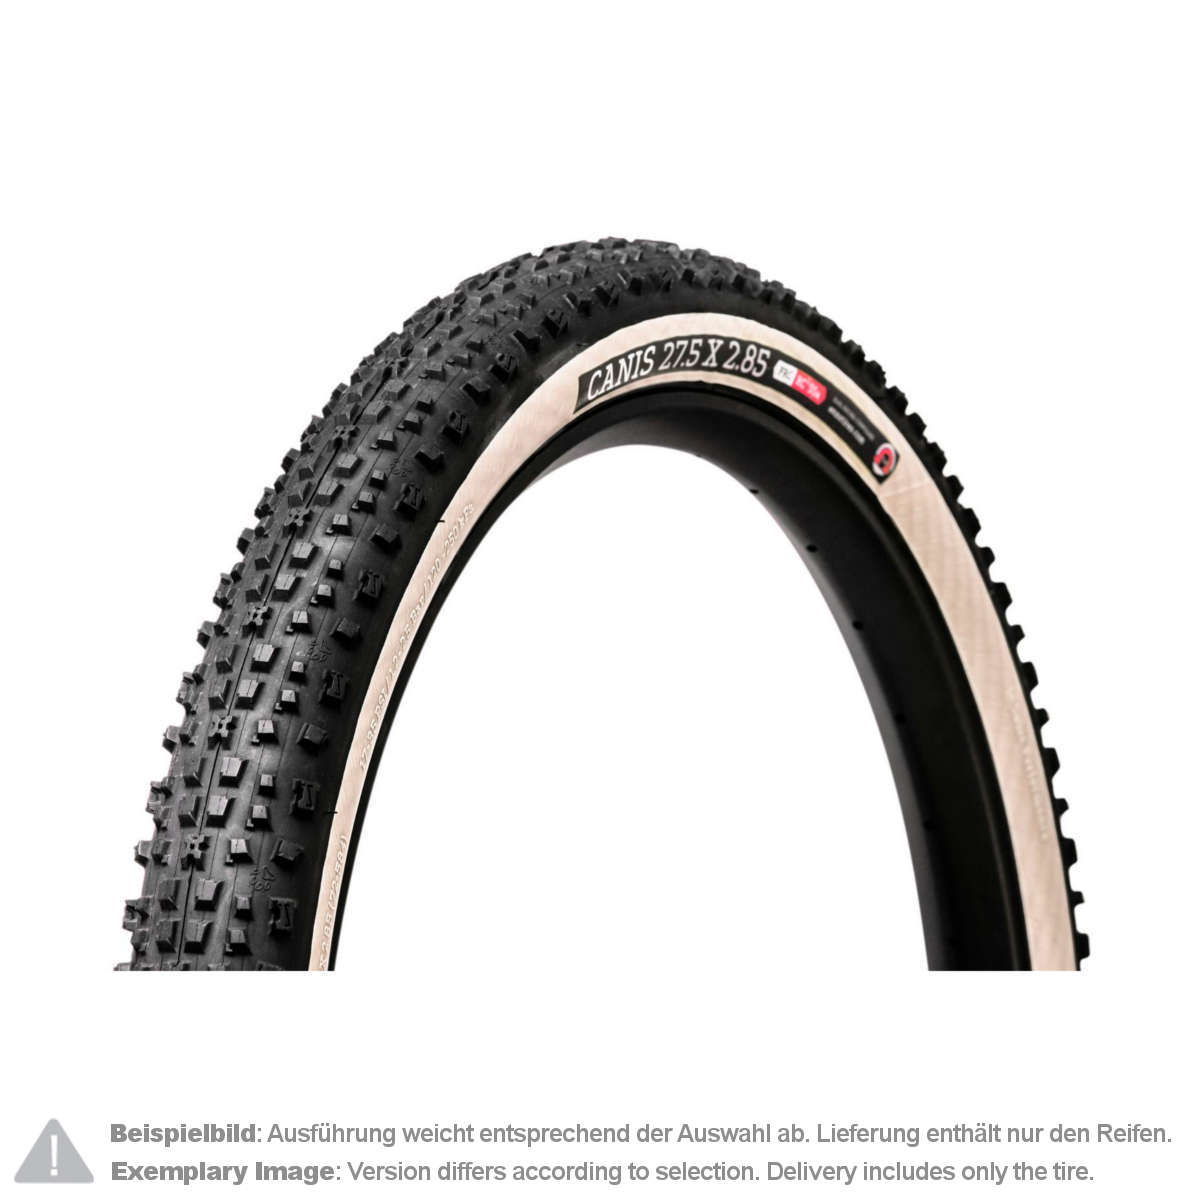 Onza MTB Tire Canis Skinwall, 29 x 2.25 Inch, Tubeless Ready, 60 TPI, C3, 65a/55a, Foldable